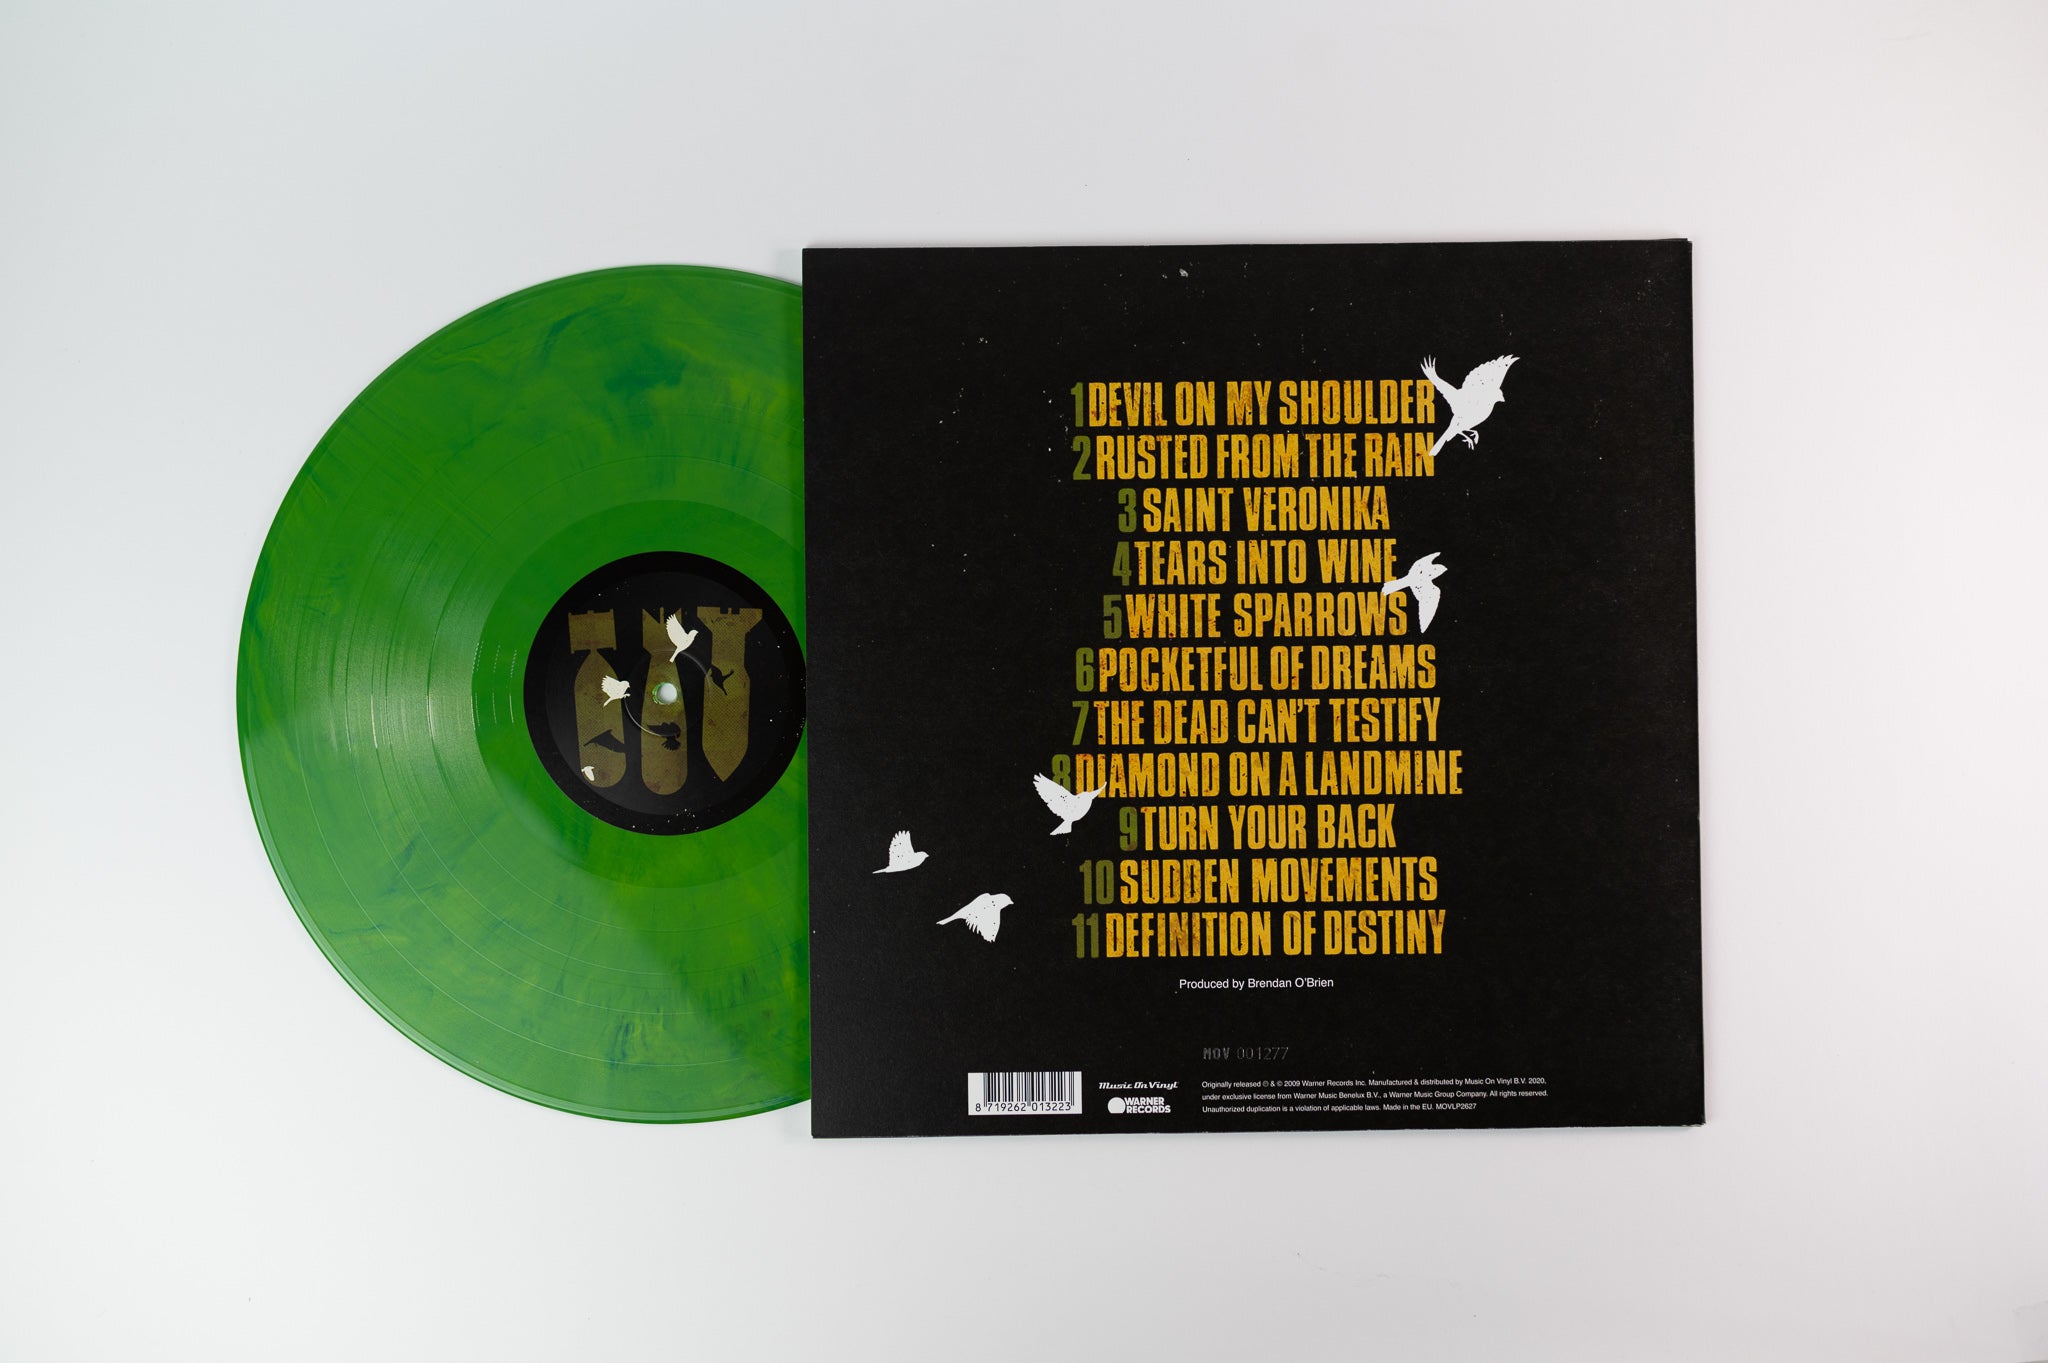 Billy Talent - Billy Talent III on Music on Vinyl Limited Numbered Green Marbled Vinyl Reissue